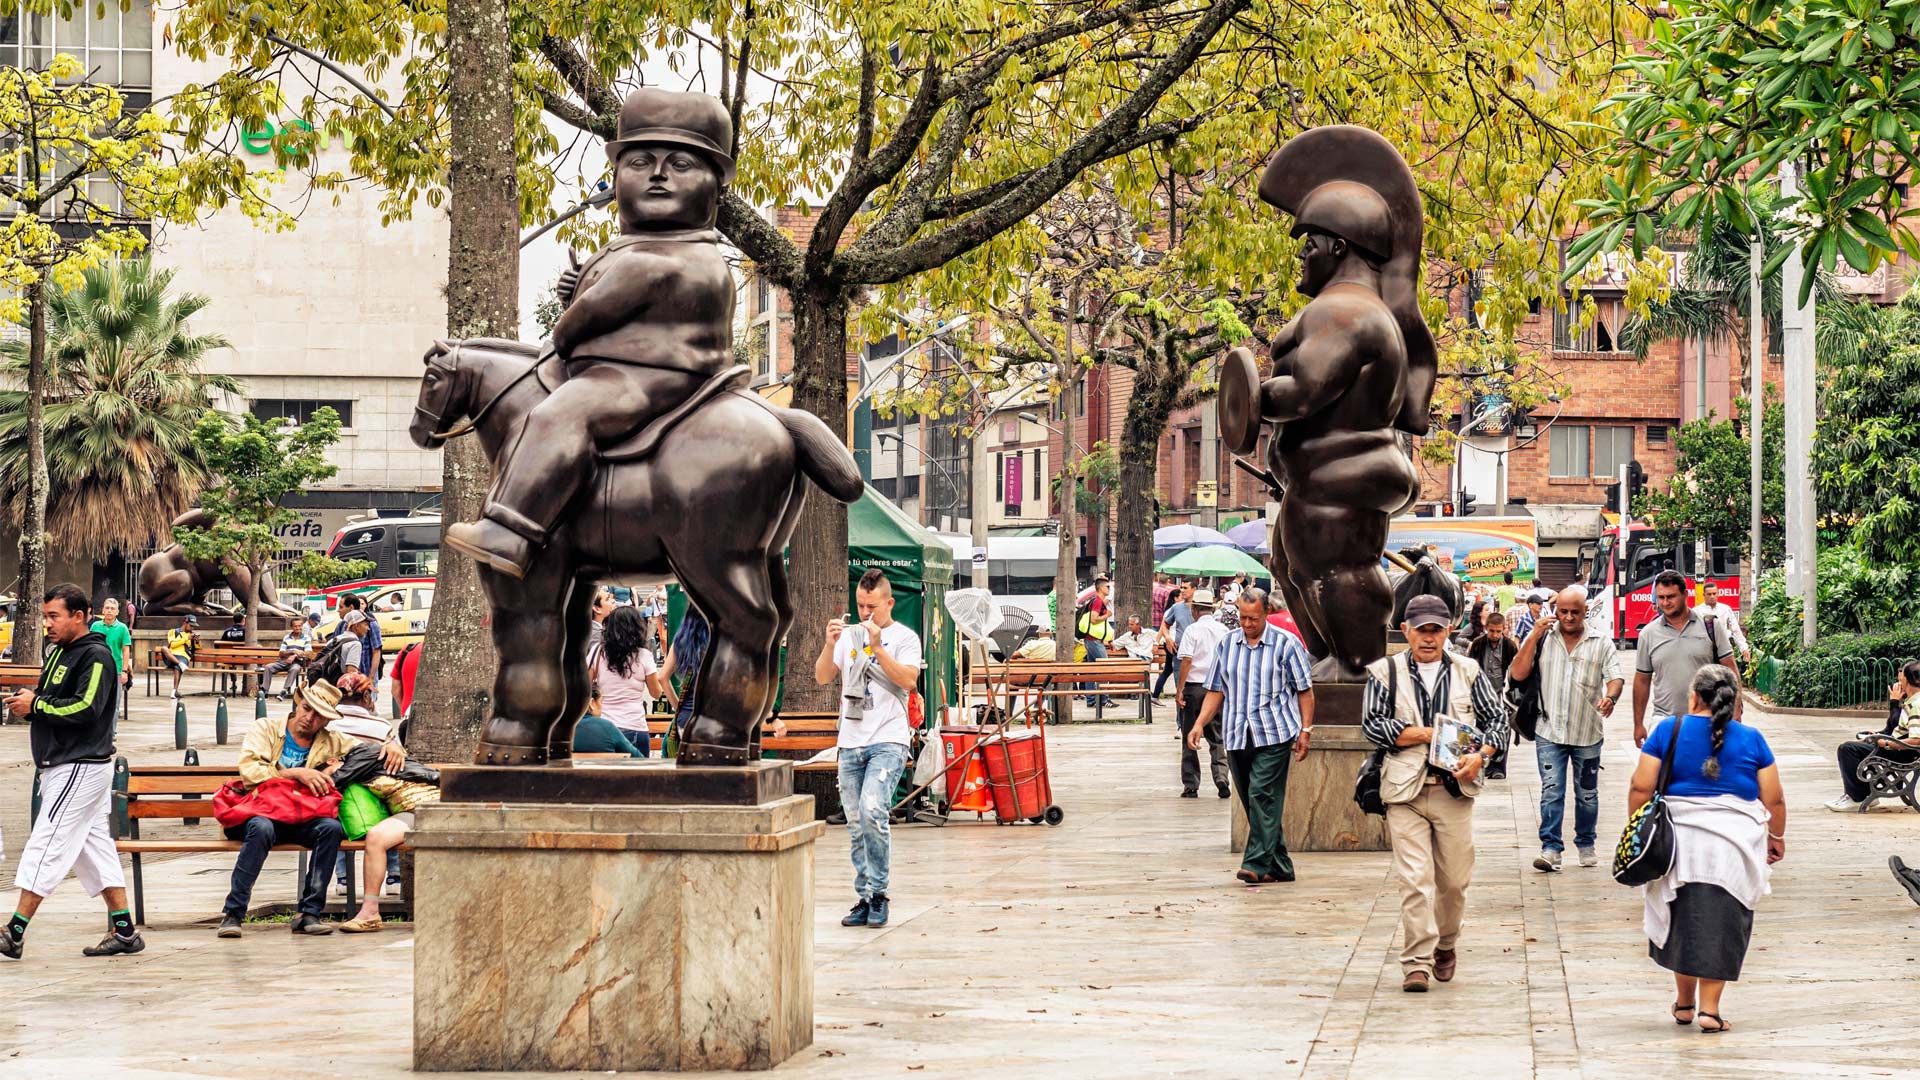 An image of Botero sculpture